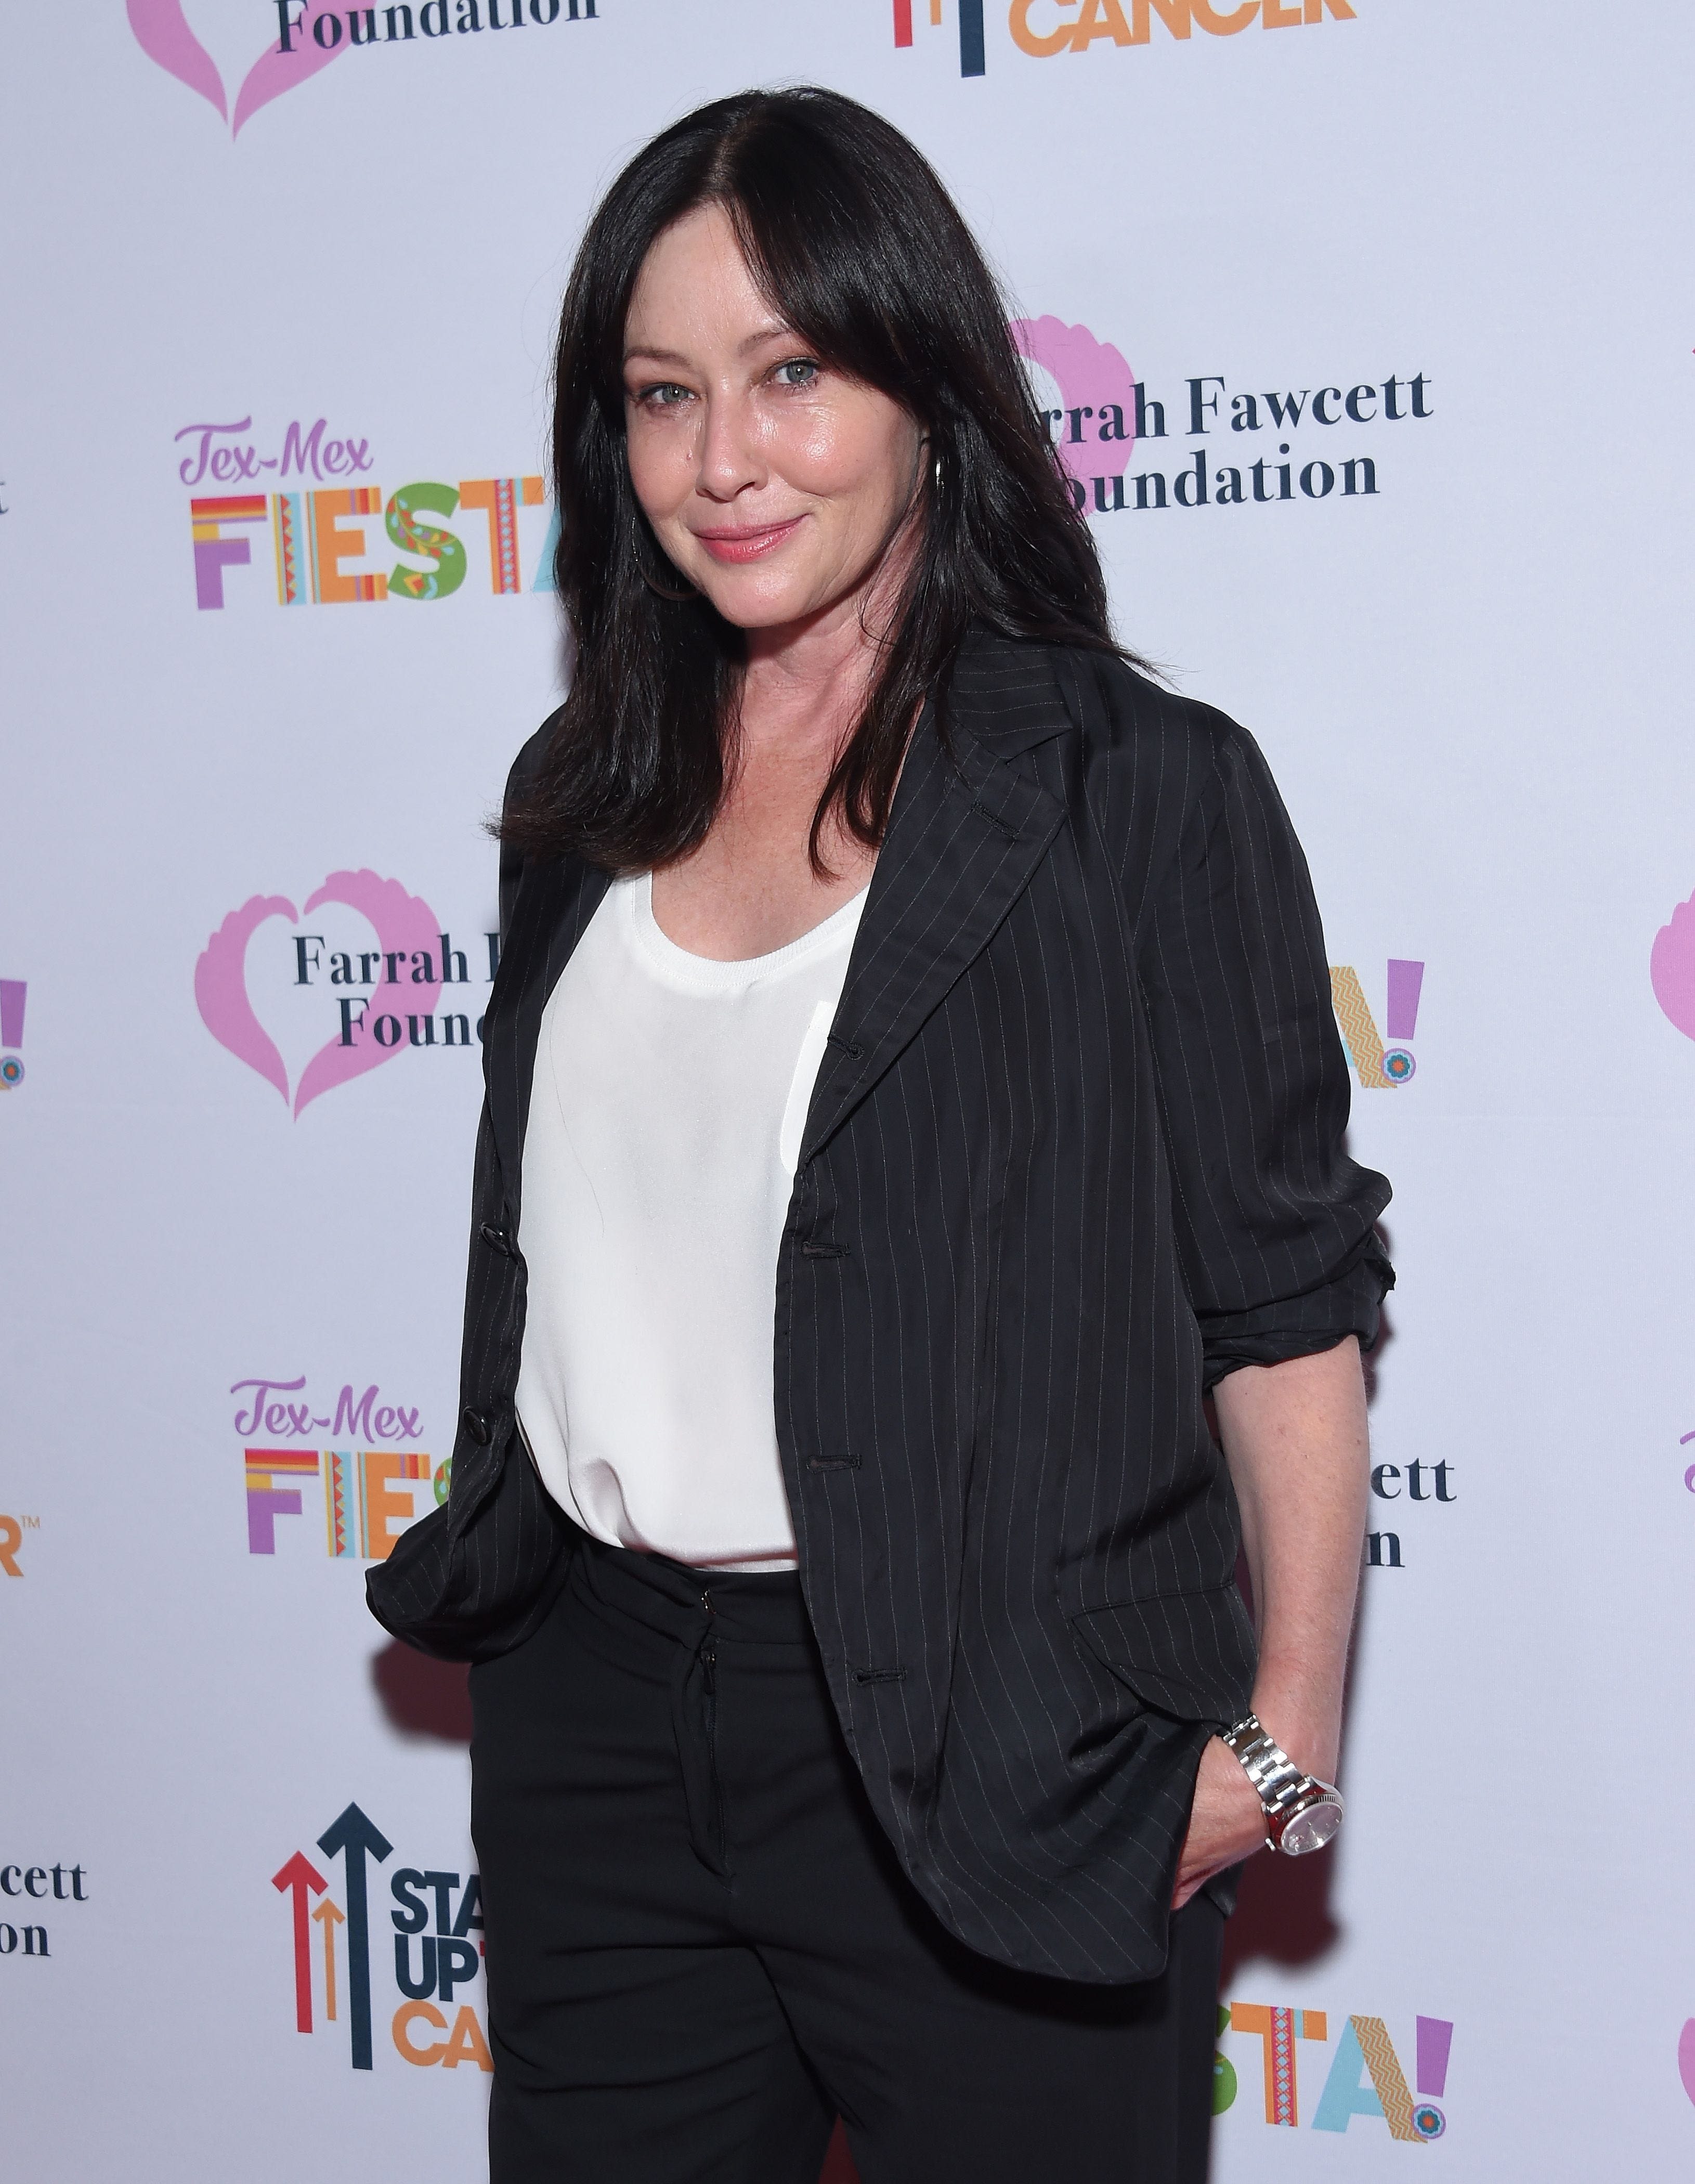 Shannen Doherty, 'Beverly Hills, 90210' star, dies at 53 after cancer battle: Reports